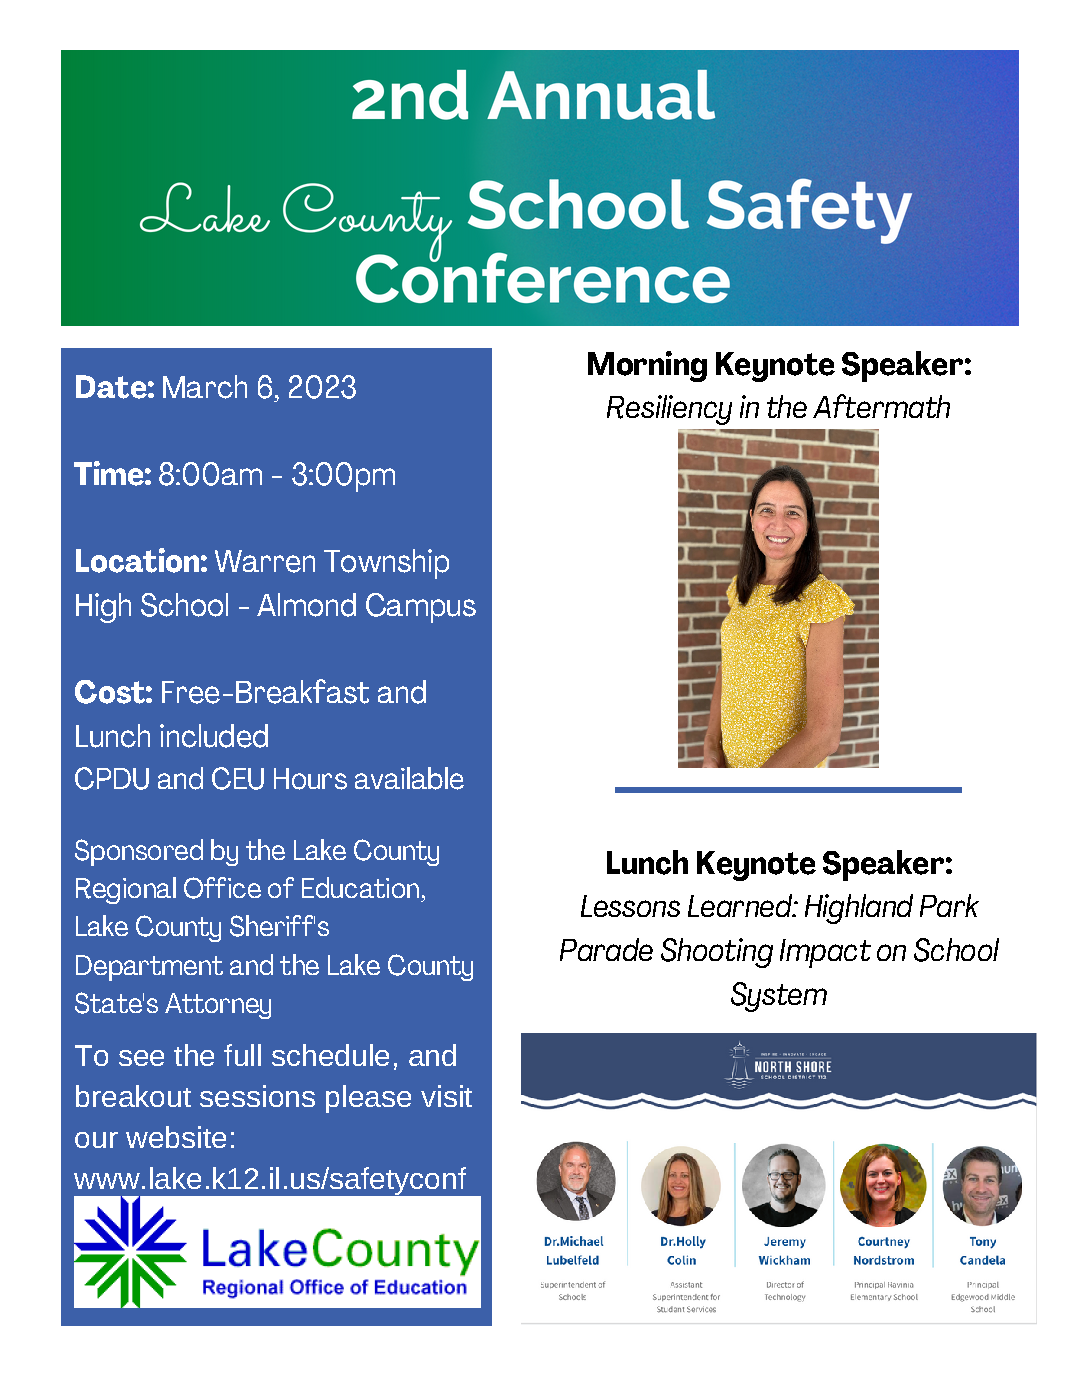 Lake County School Safety Conference flyer